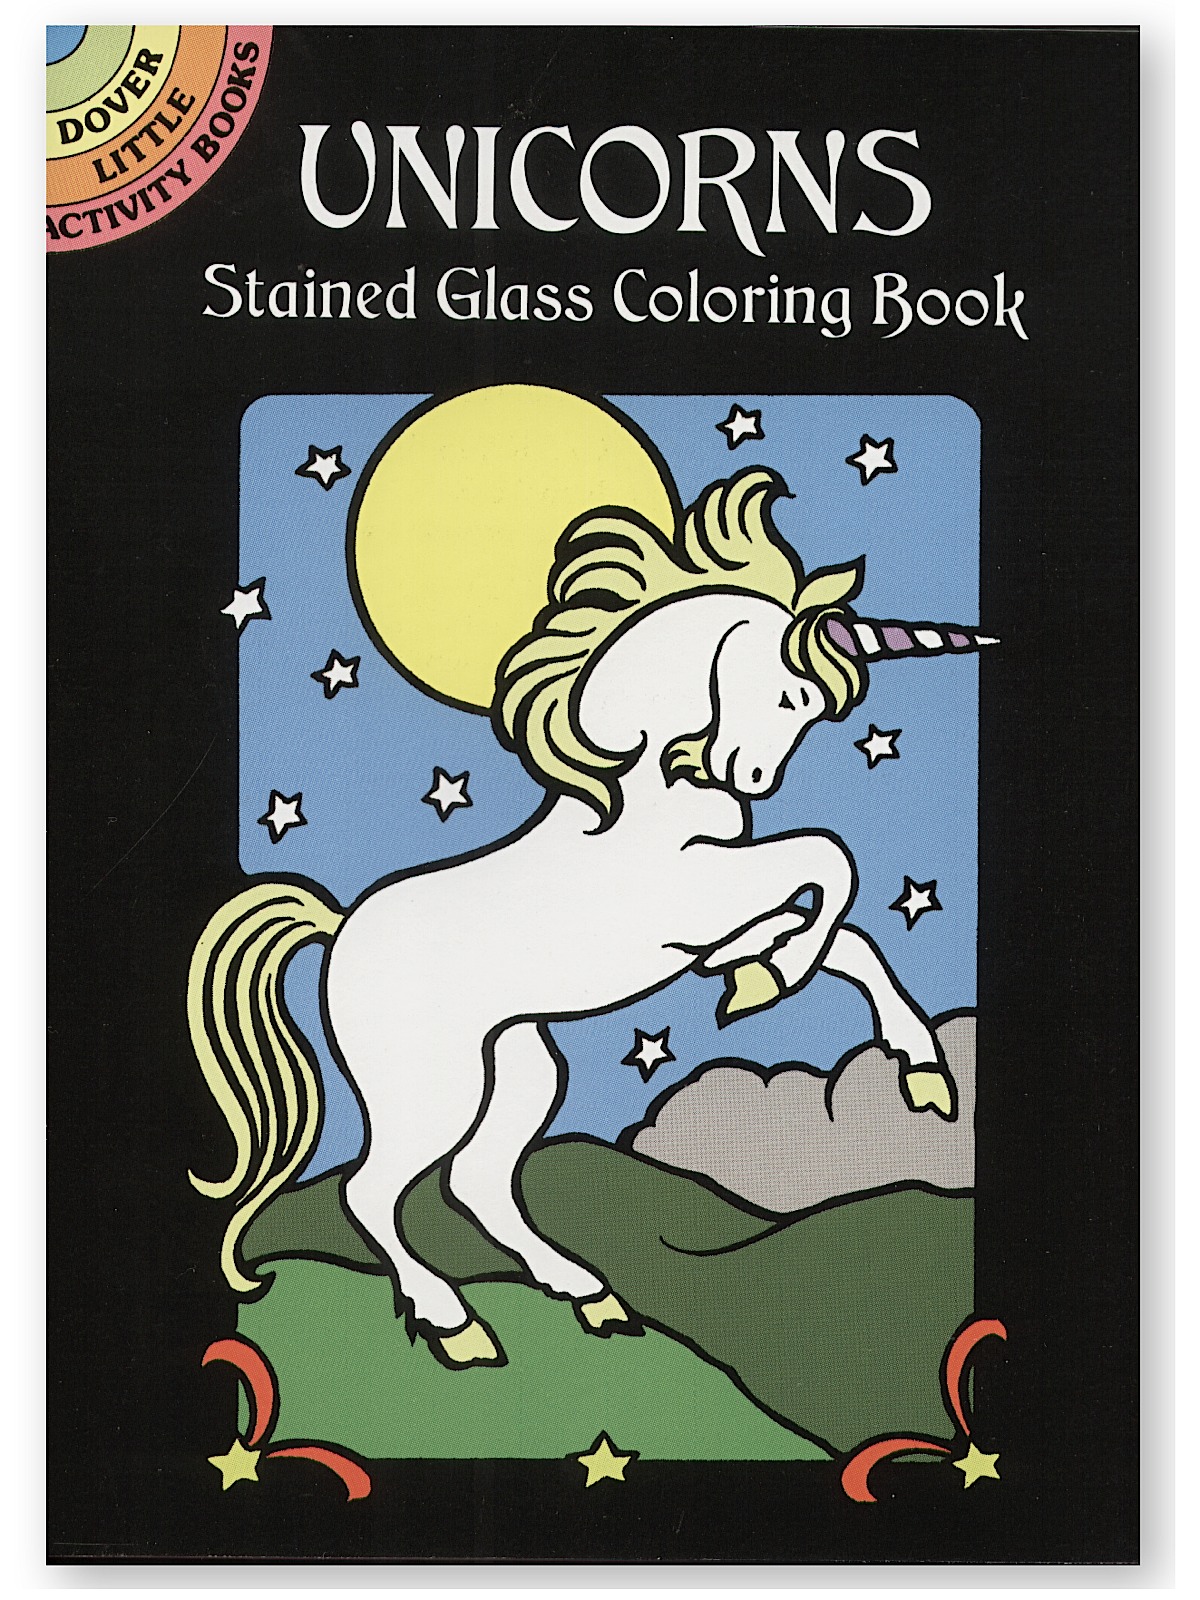 Unicorns Stained Glass Coloring Book Unicorns Stained Glass Coloring Book